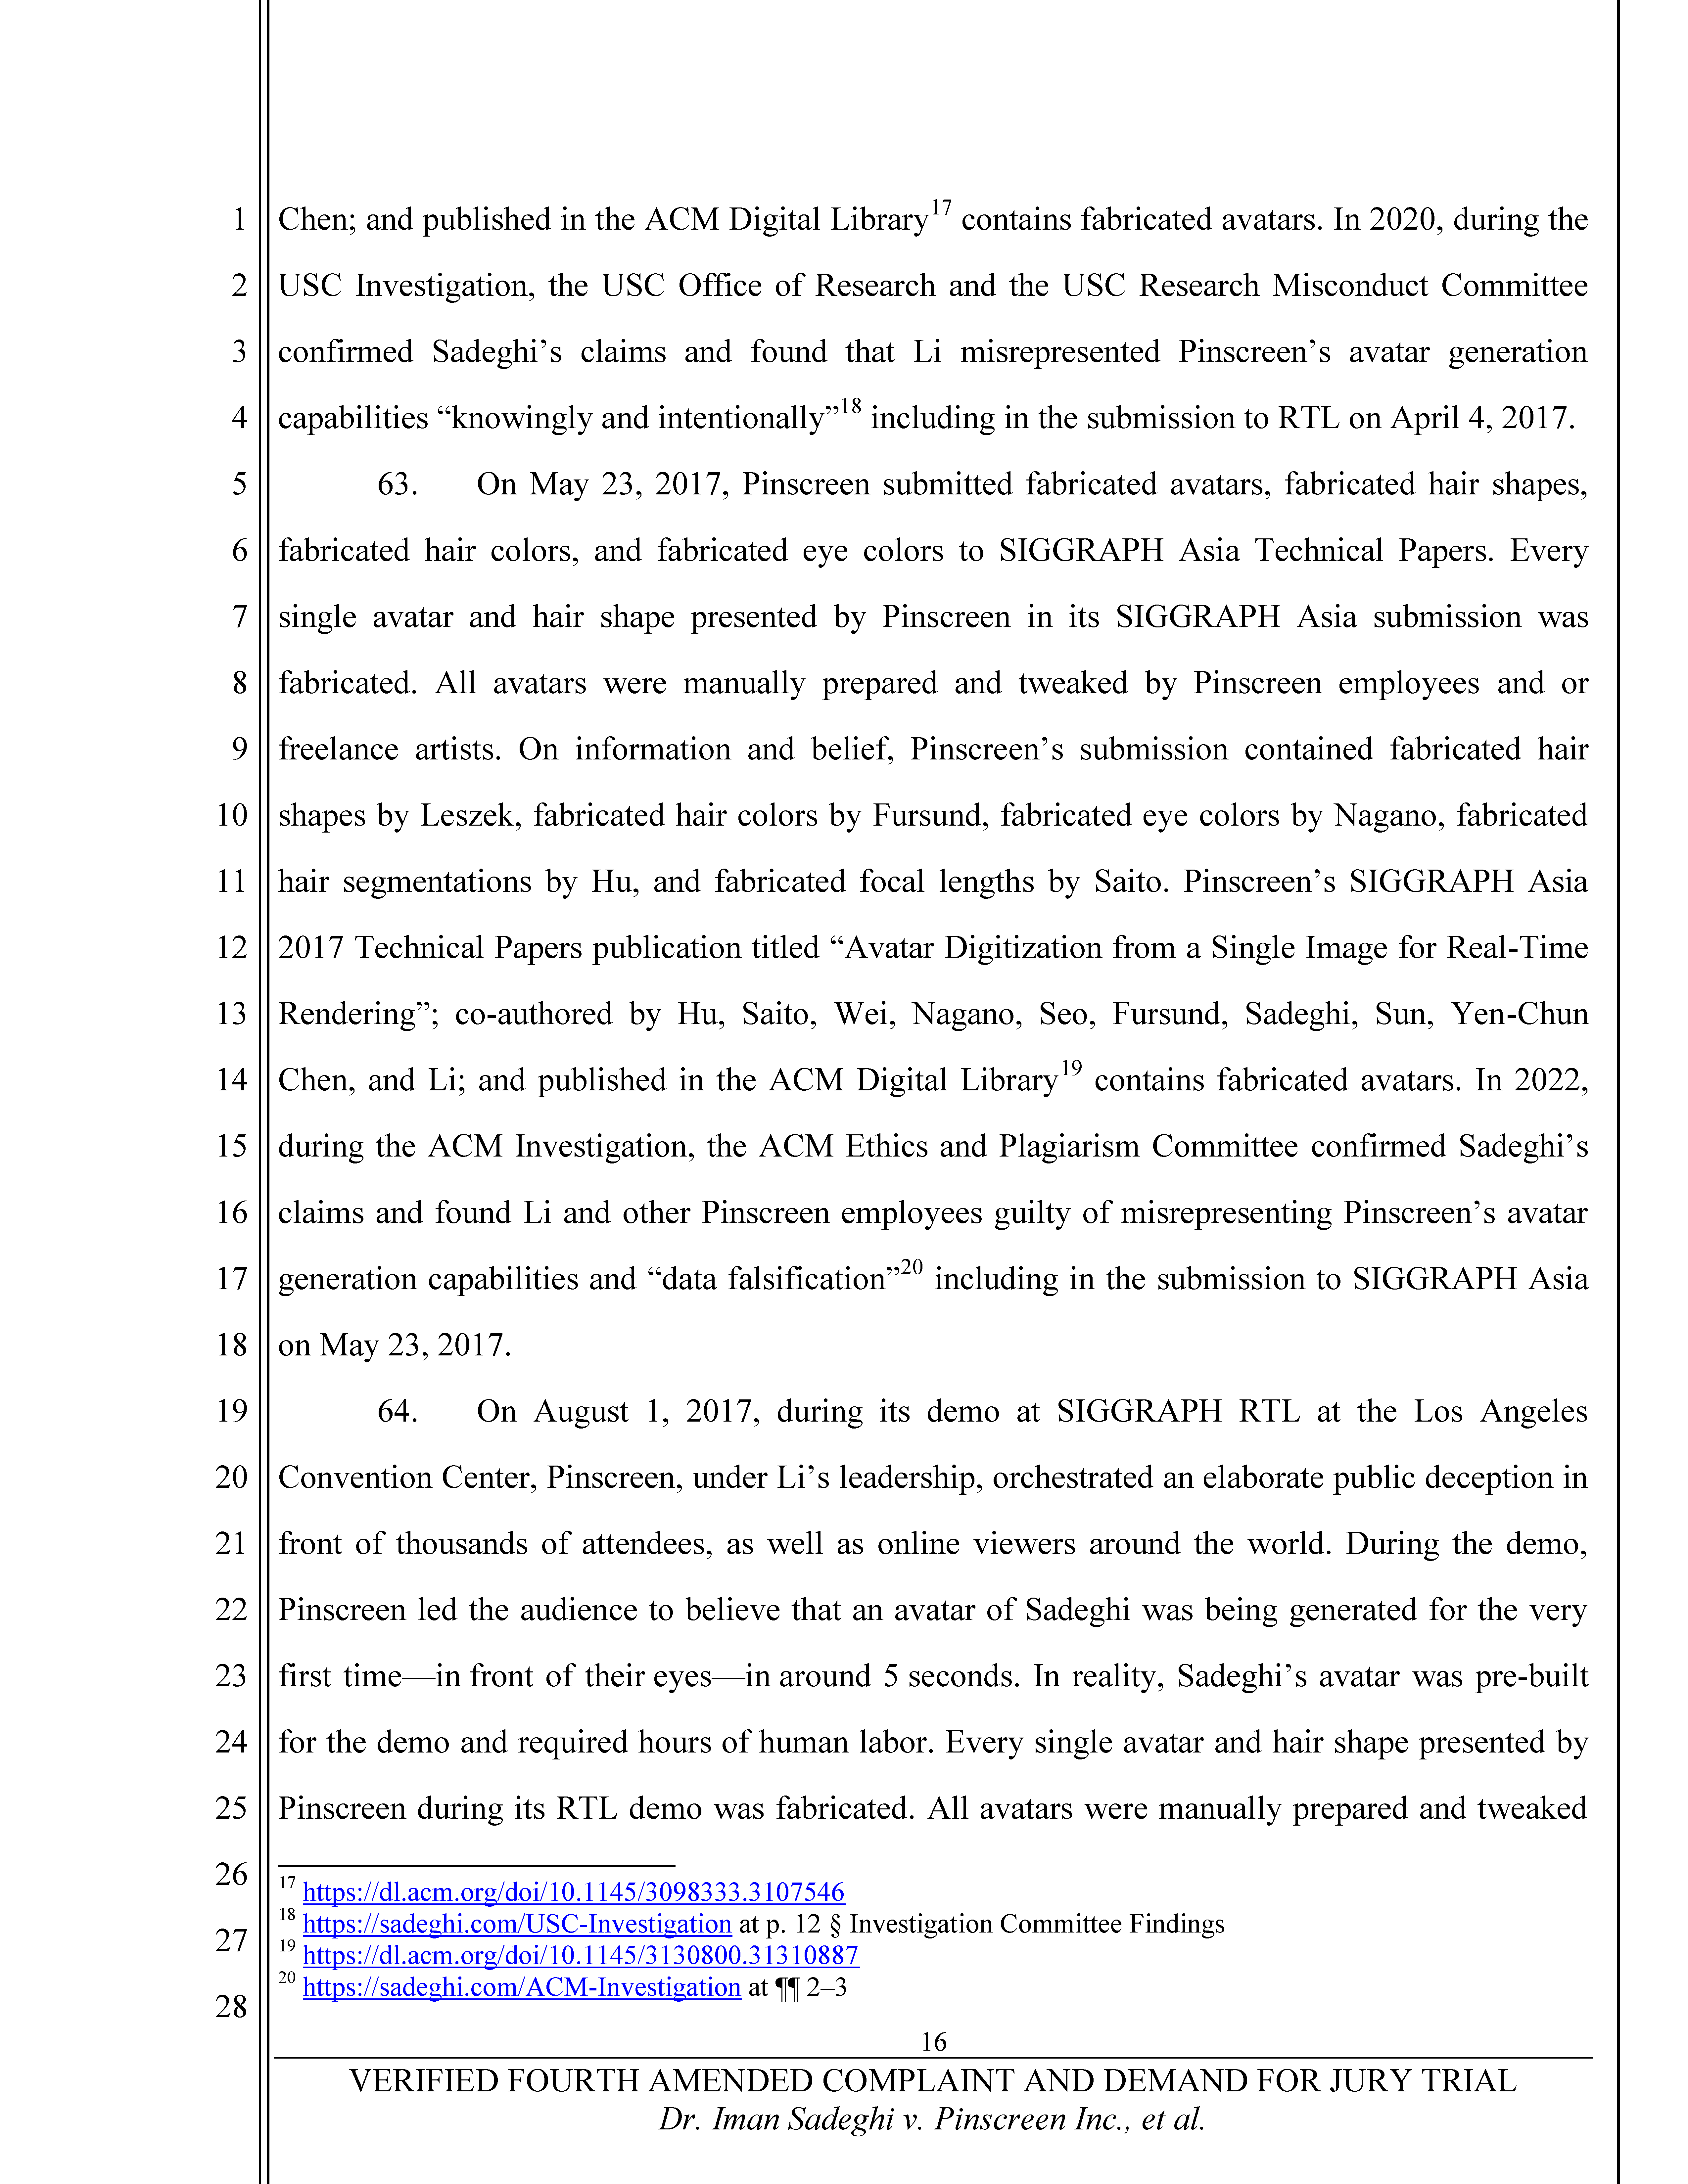 Fourth Amended Complaint (4AC) Page 17